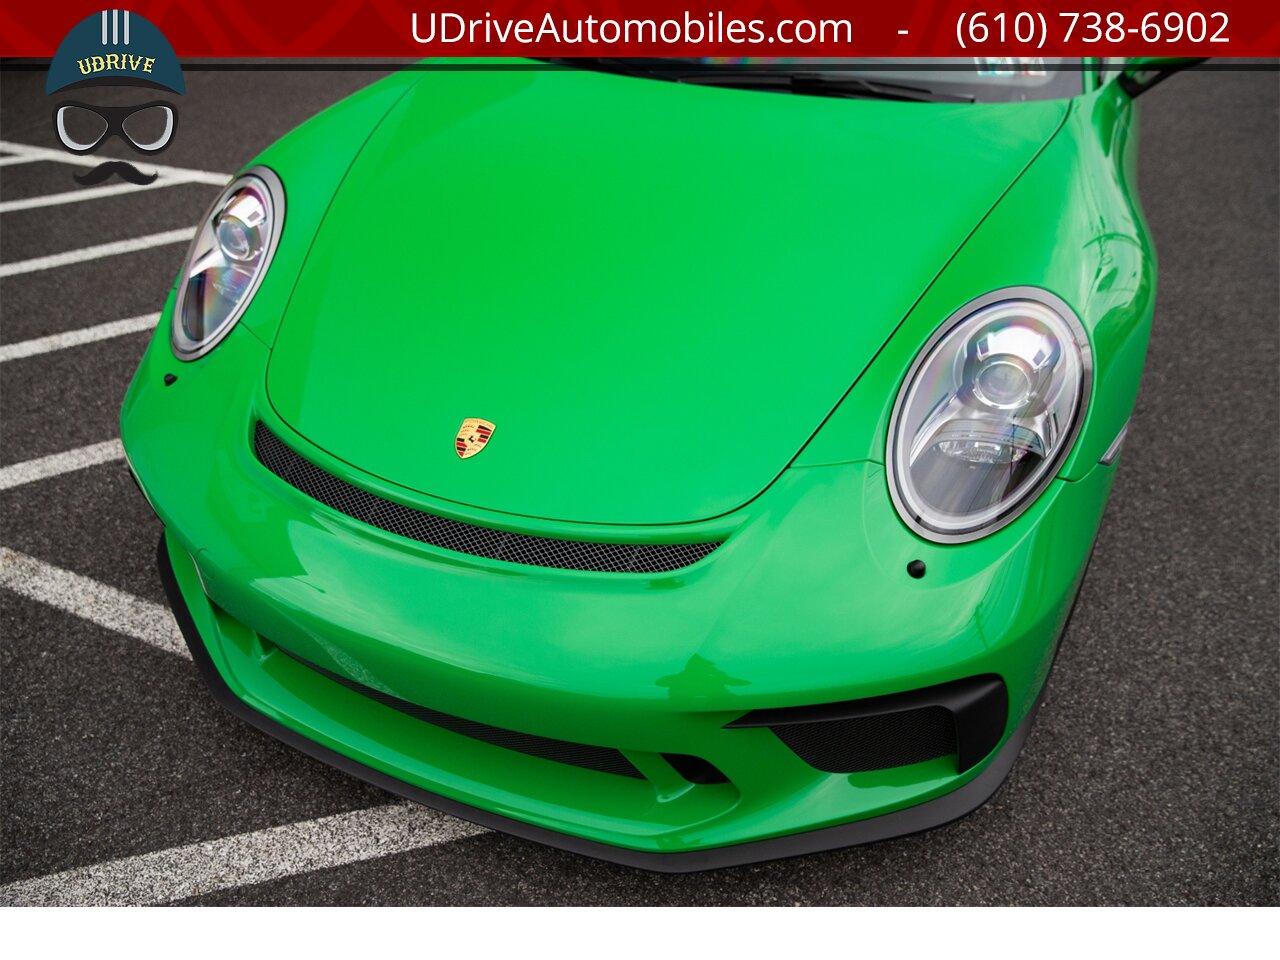 2018 Porsche 911 GT3 6 Speed Paint To Sample Viper Green 48 Miles  Front Axle Lift PCCB Carbon Bucket Seats - Photo 10 - West Chester, PA 19382